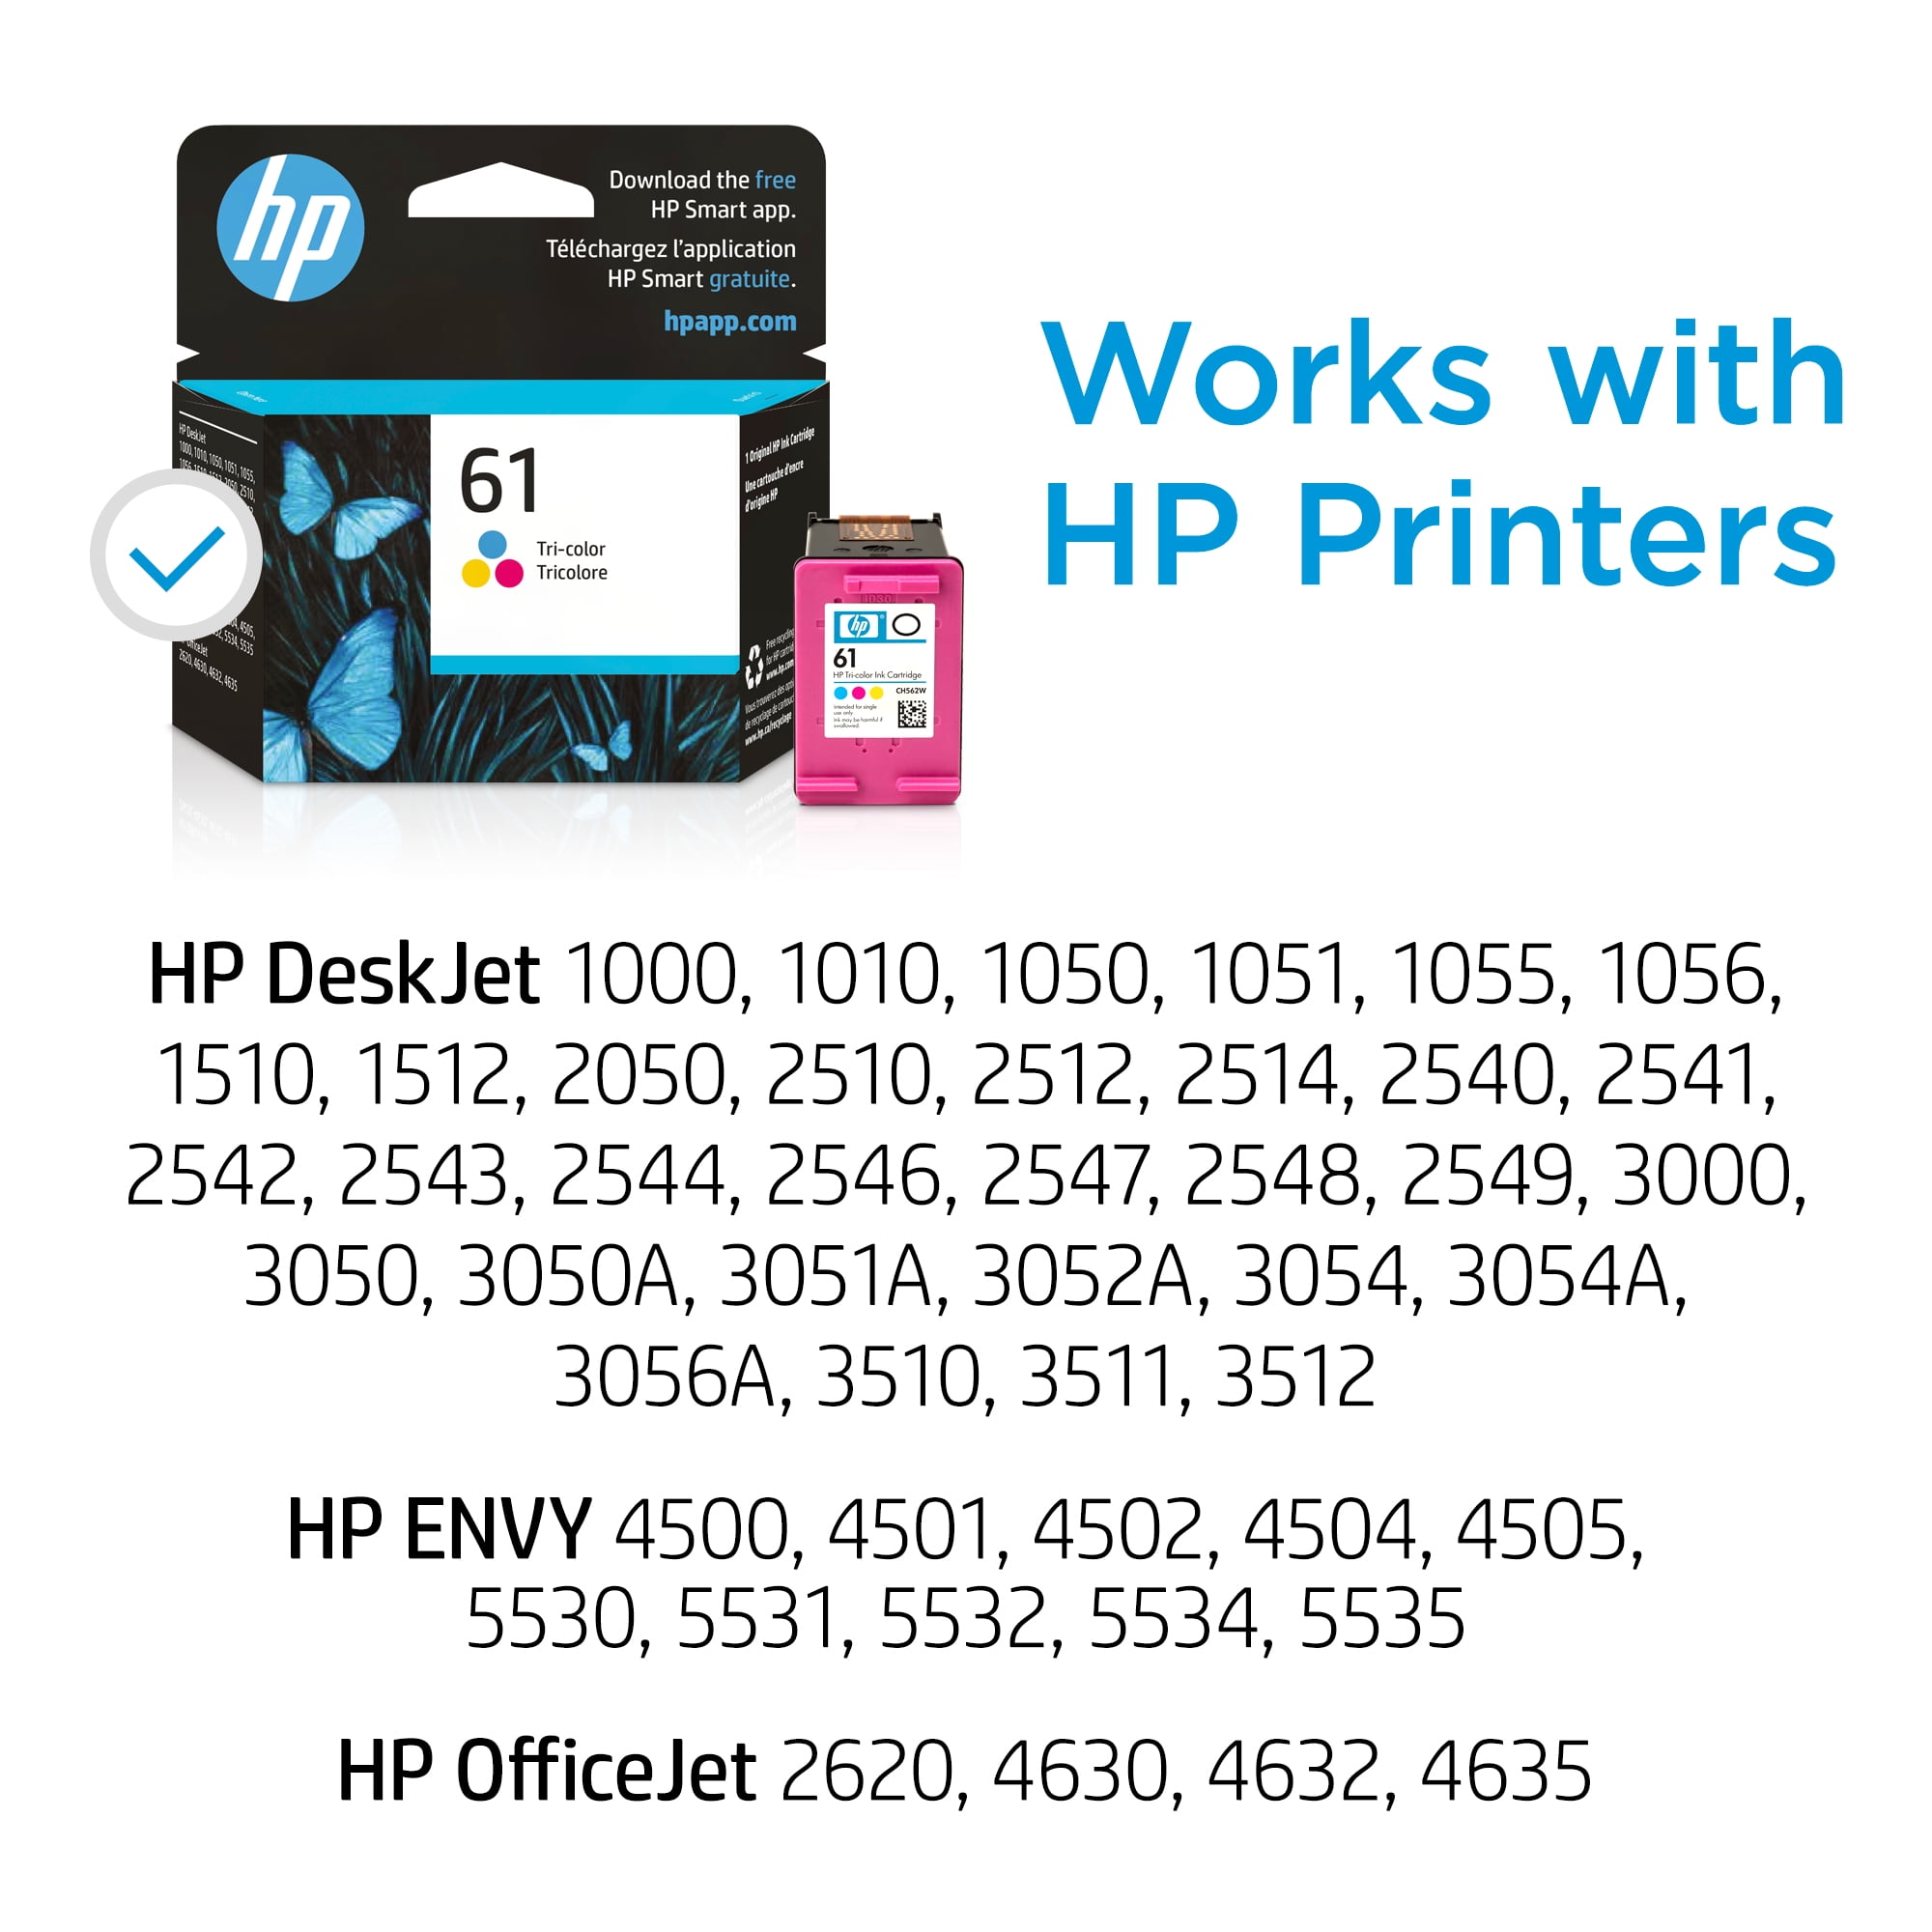 HP HP 301XL TRI-COLOR INK CARTRIDG Cartouches d'encre